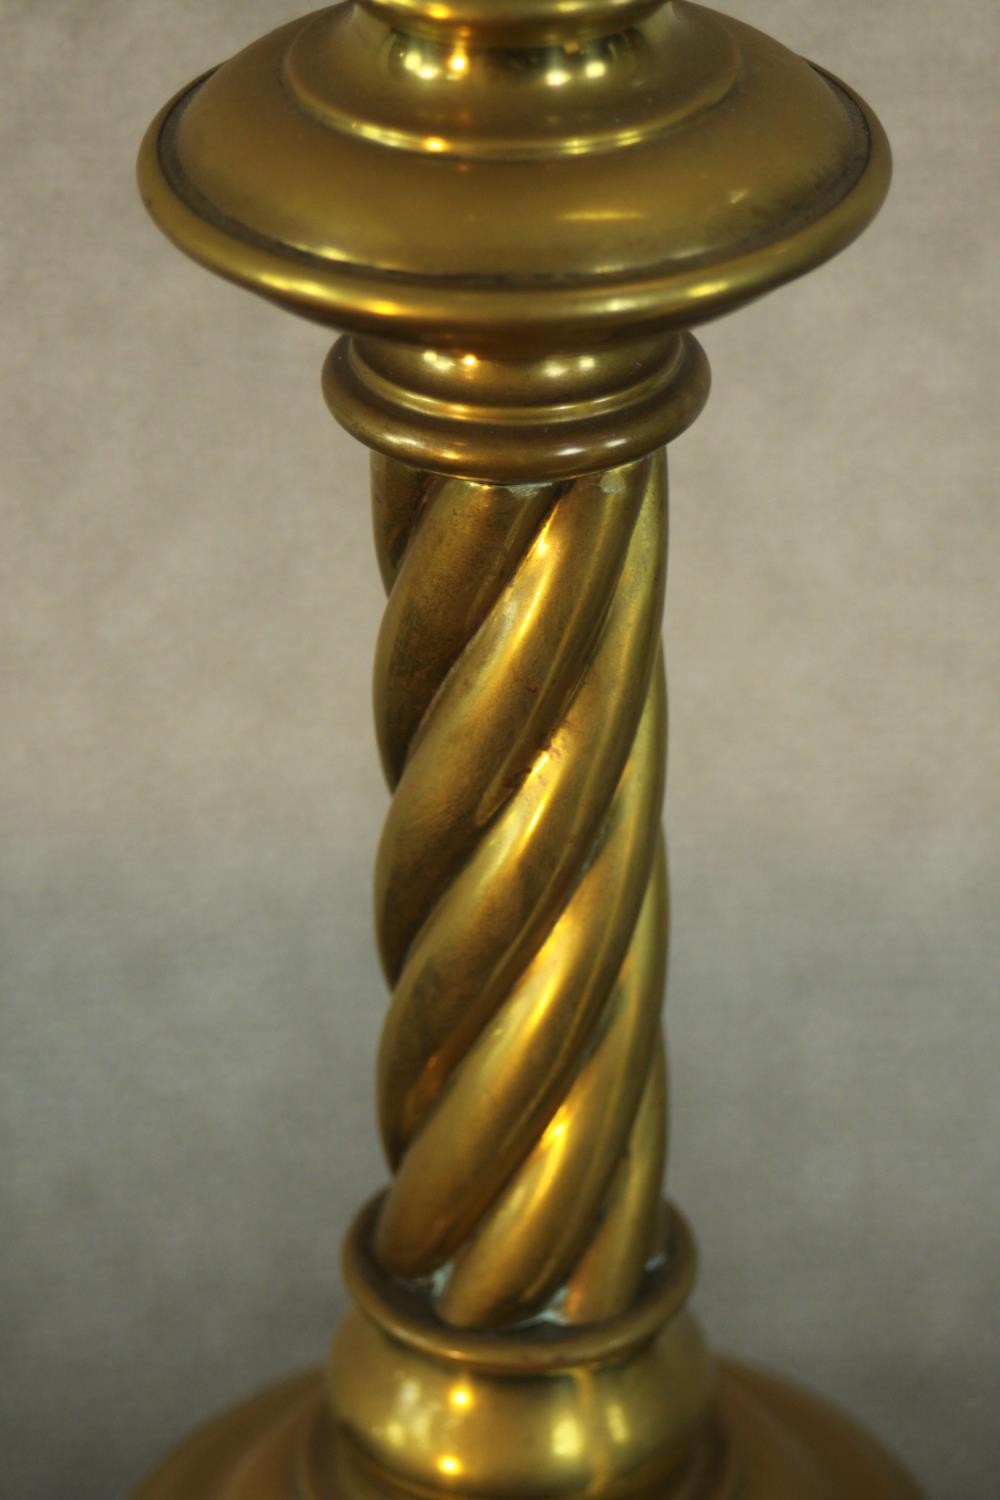 A pair of large early 20th century brass ecclesiastical twist stem floor standing candle holders - Image 4 of 5